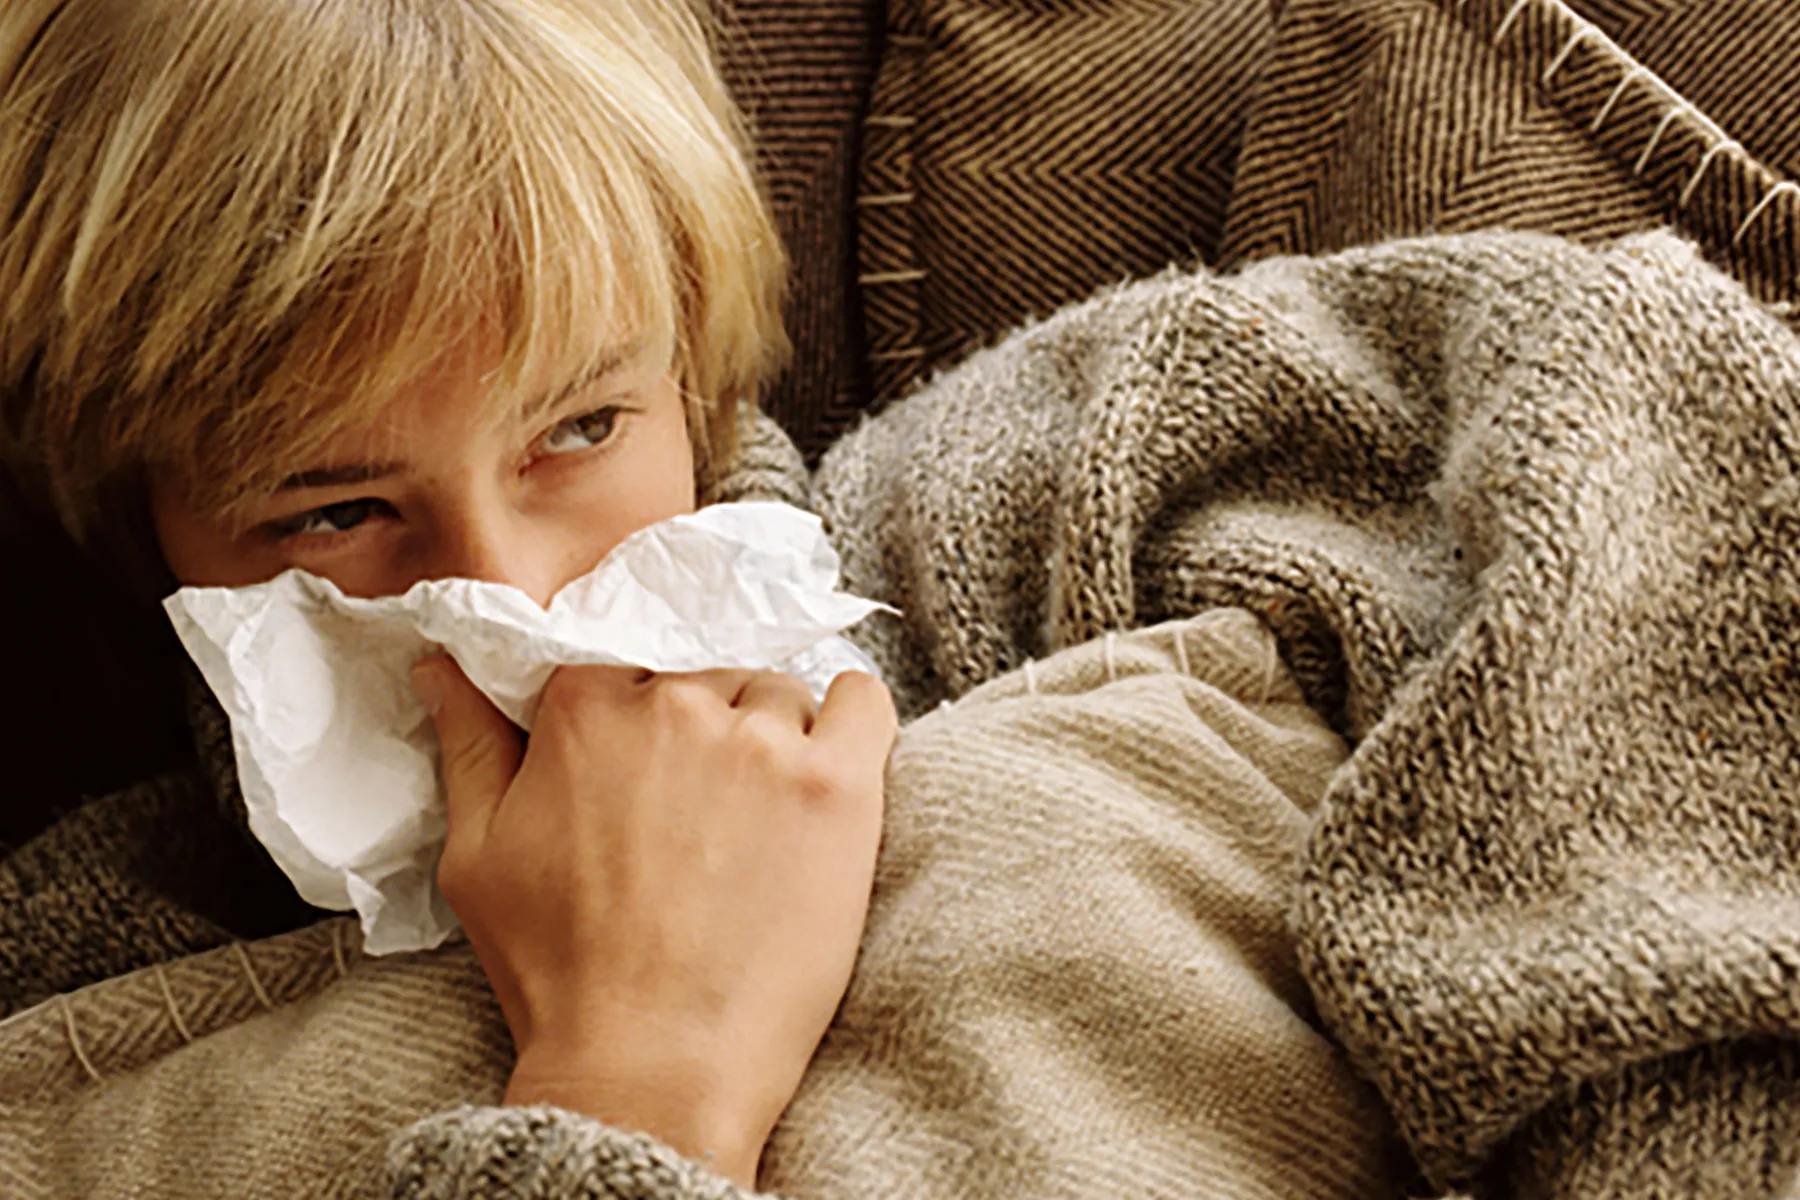 Symptoms as Clues: Is It RSV, COVID, the Flu or the Common Cold?